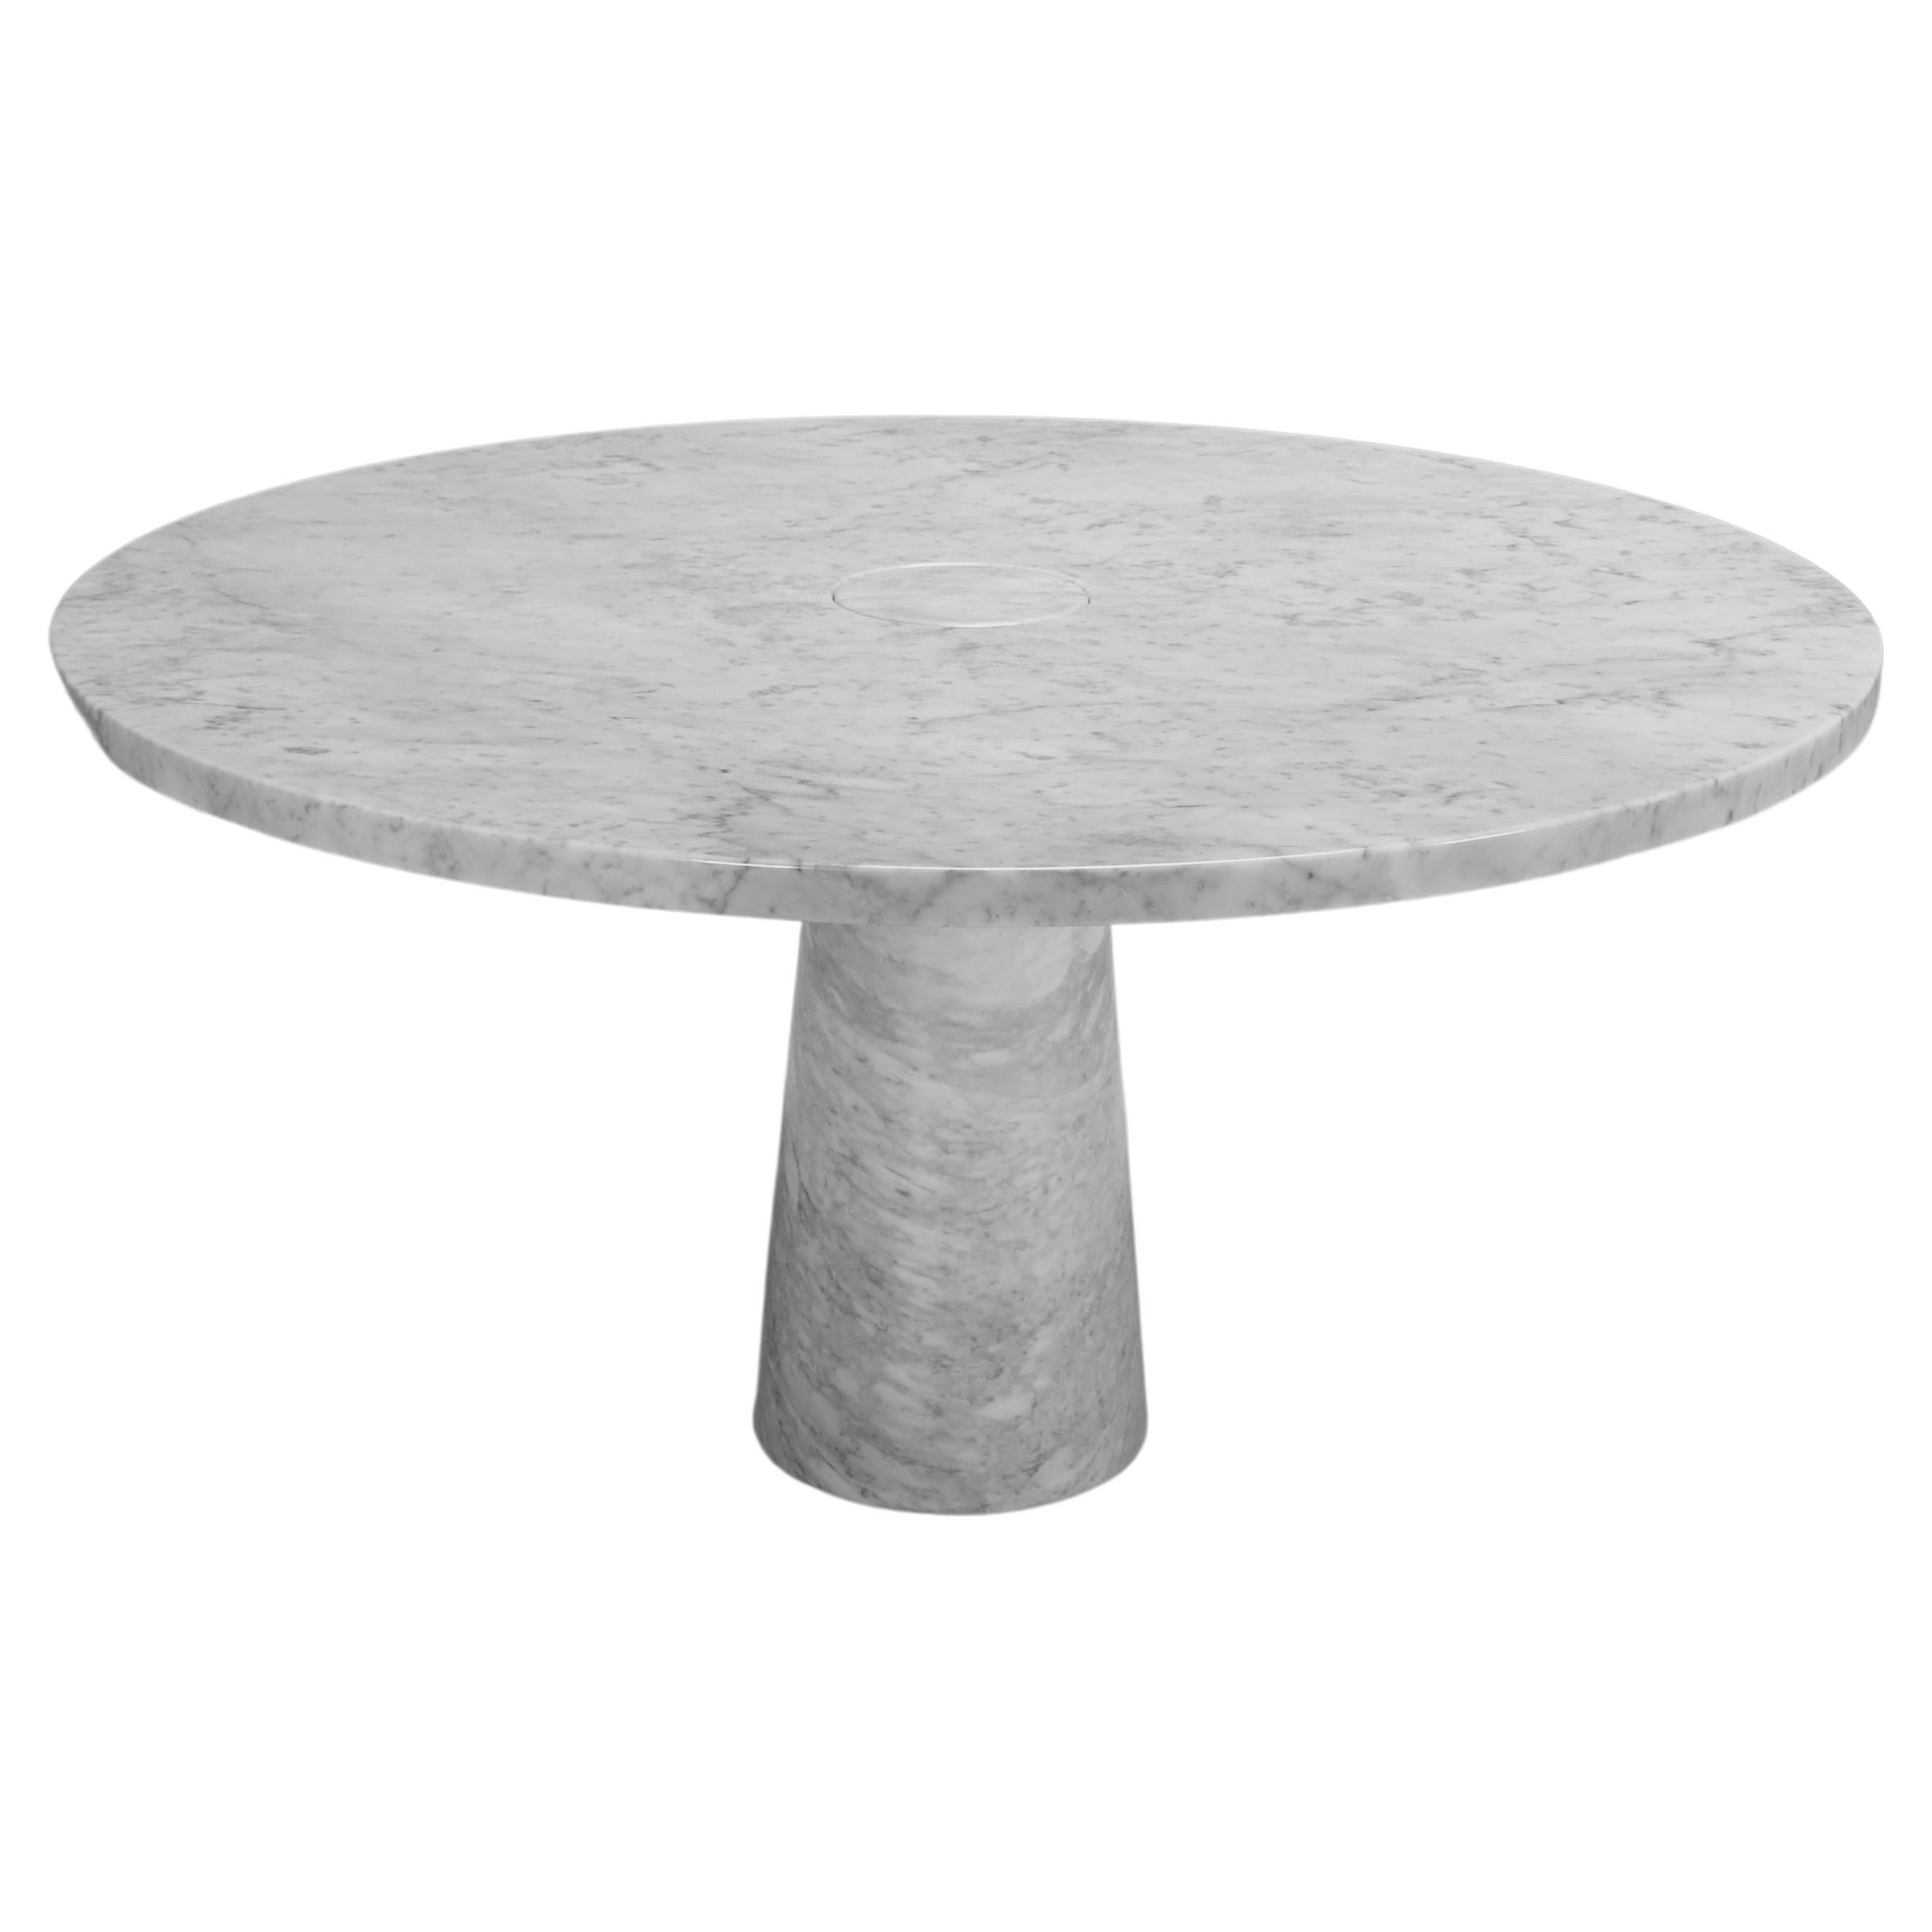 Original ‘Eros’ Dining Table in Carrara Marble by Angelo Mangiarotti, 1970s